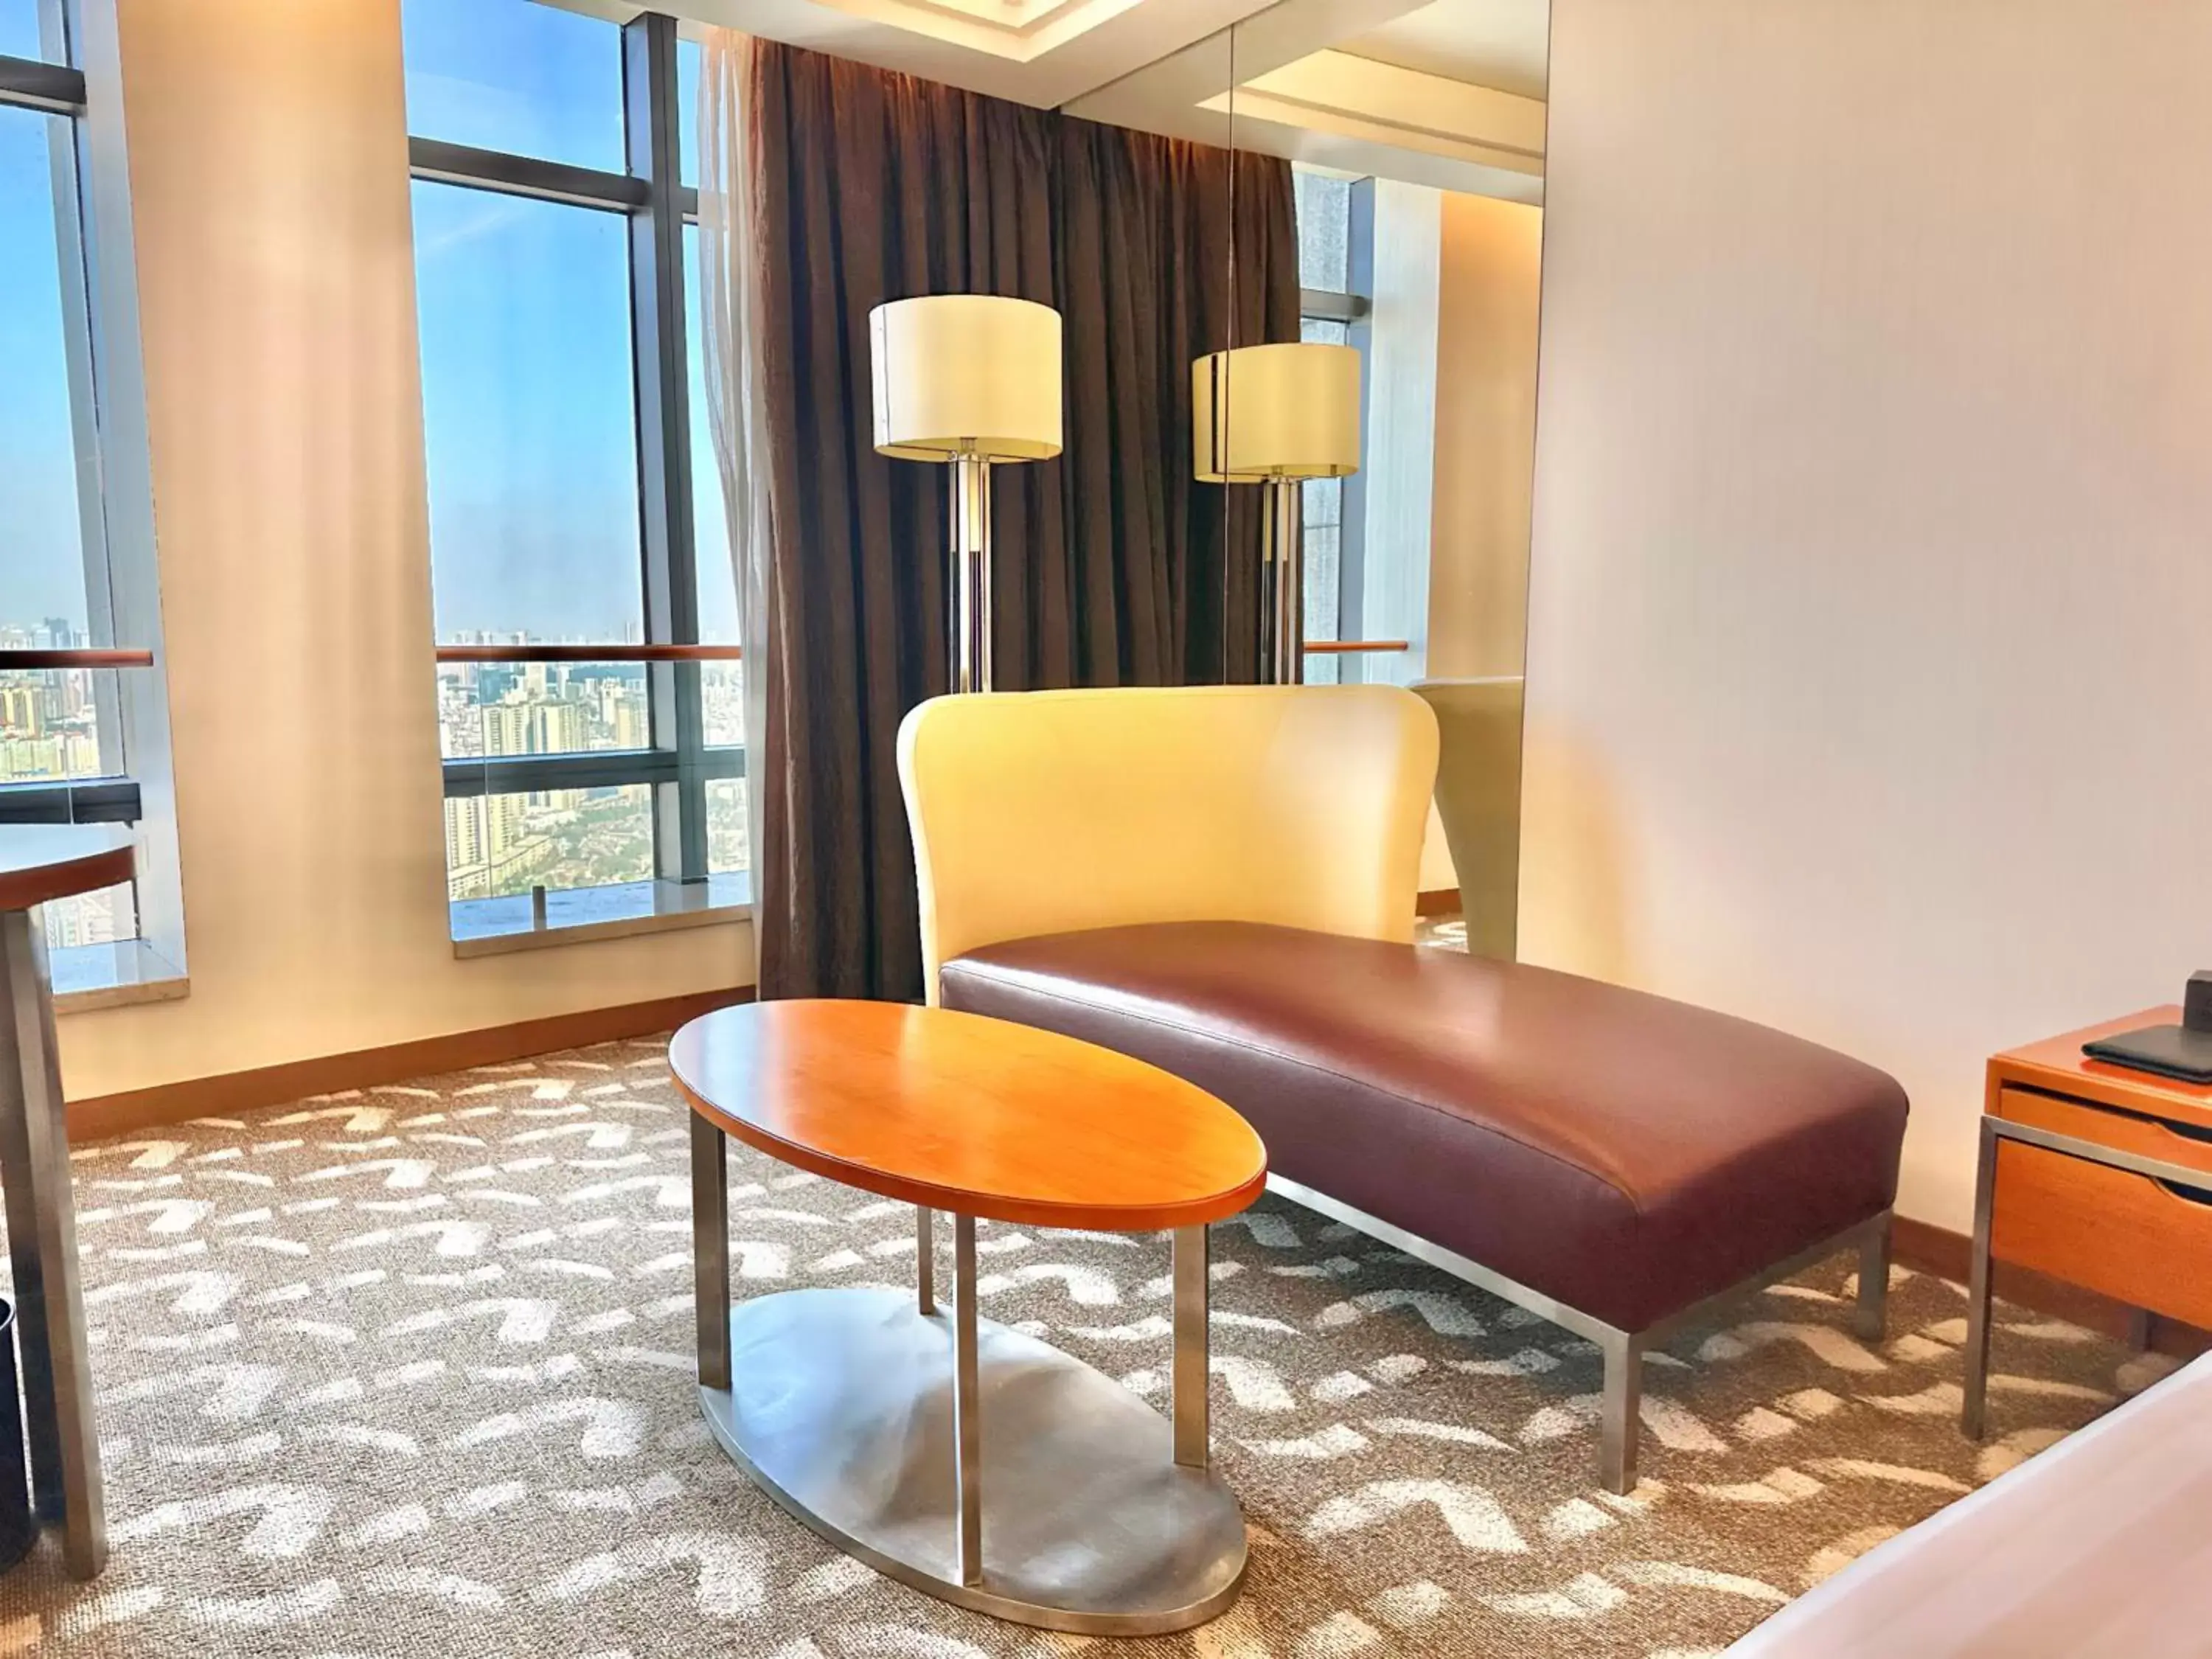 Seating Area in Swissotel Foshan, Guangdong - Free shuttle bus during canton fair complex during canton fair period